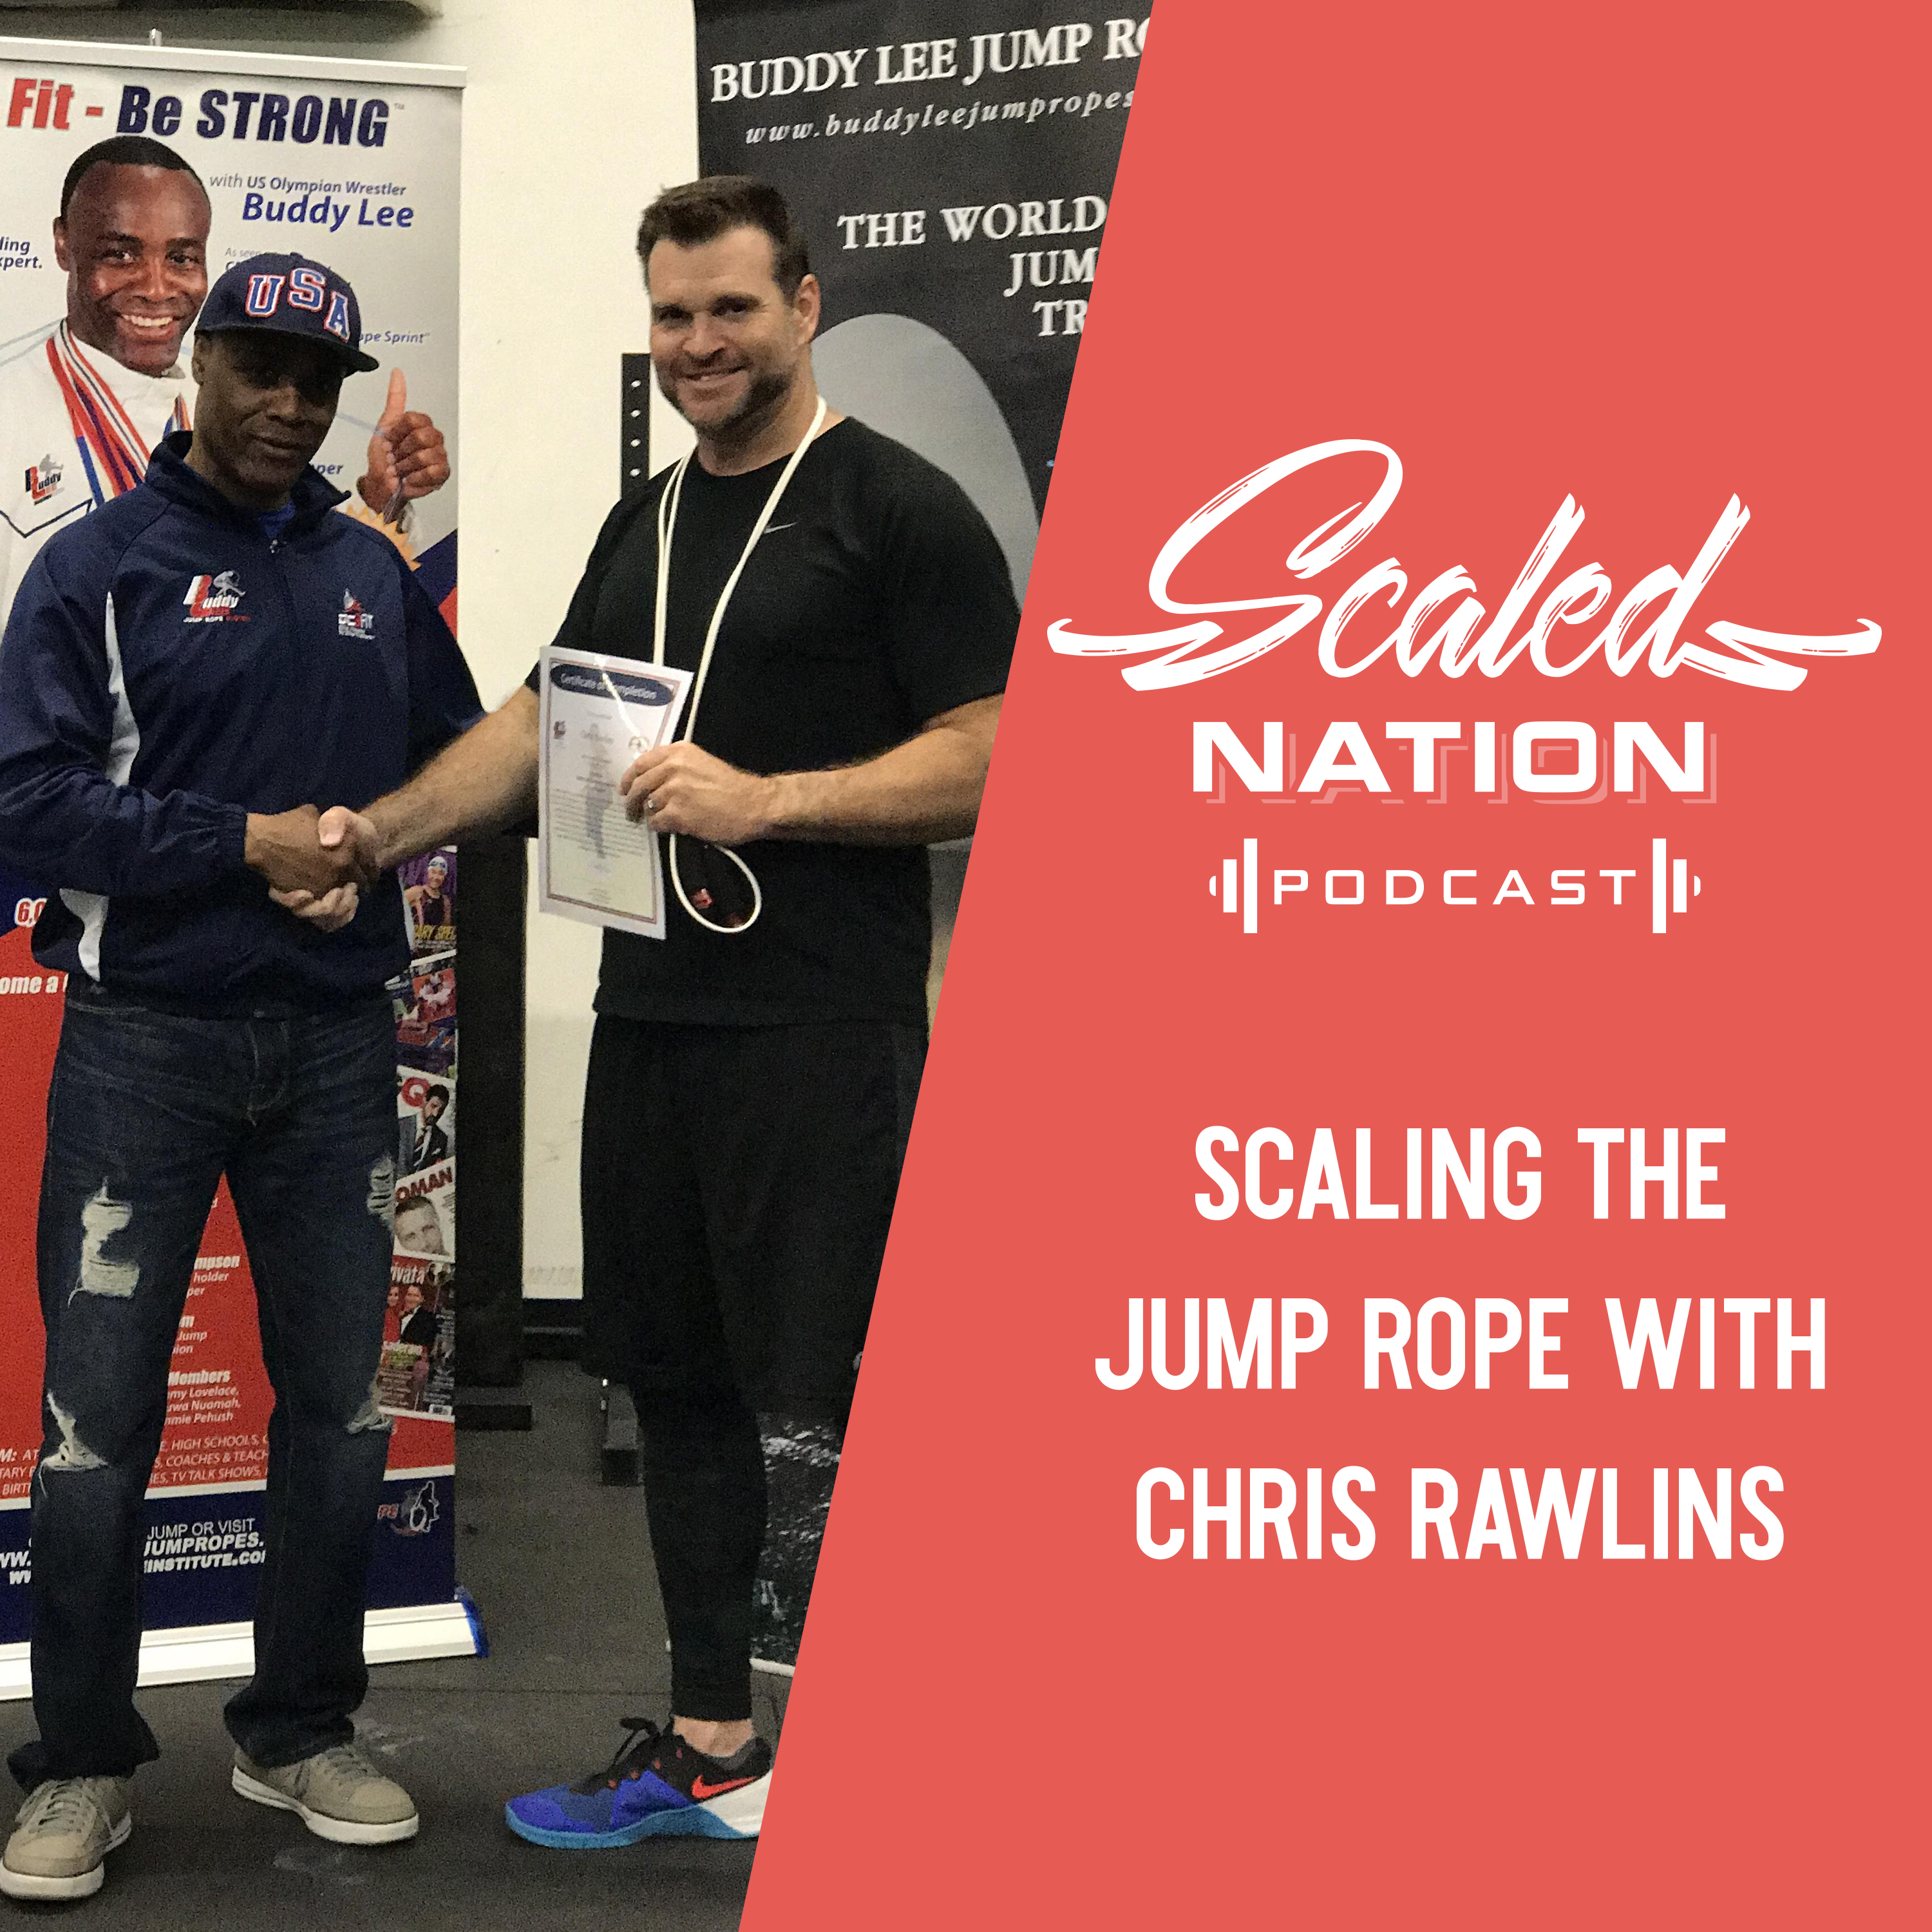 CrossFit Scaling Jump Rope Scaled Nation Podcast